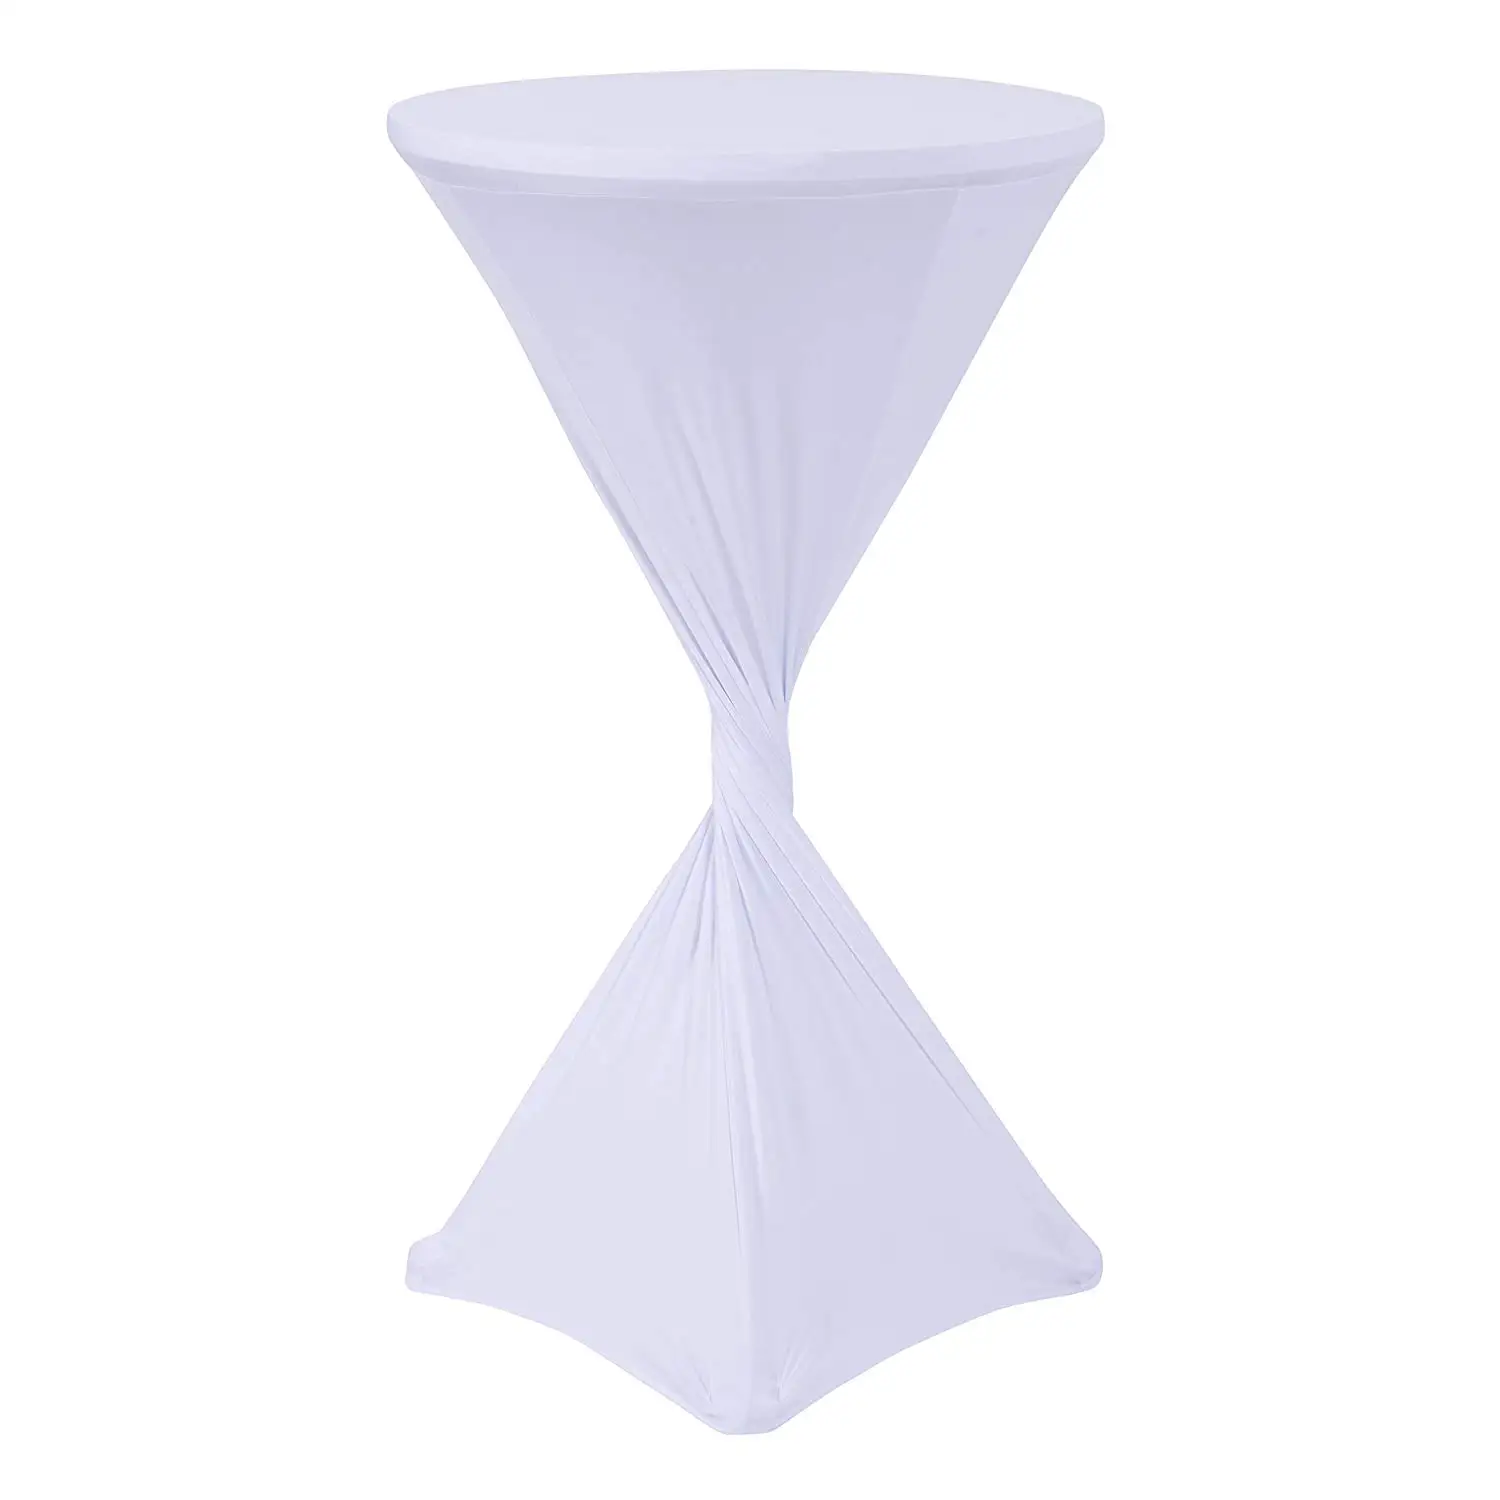 Cheap Spandex Cocktail Table, find Spandex Cocktail Table deals on line ...